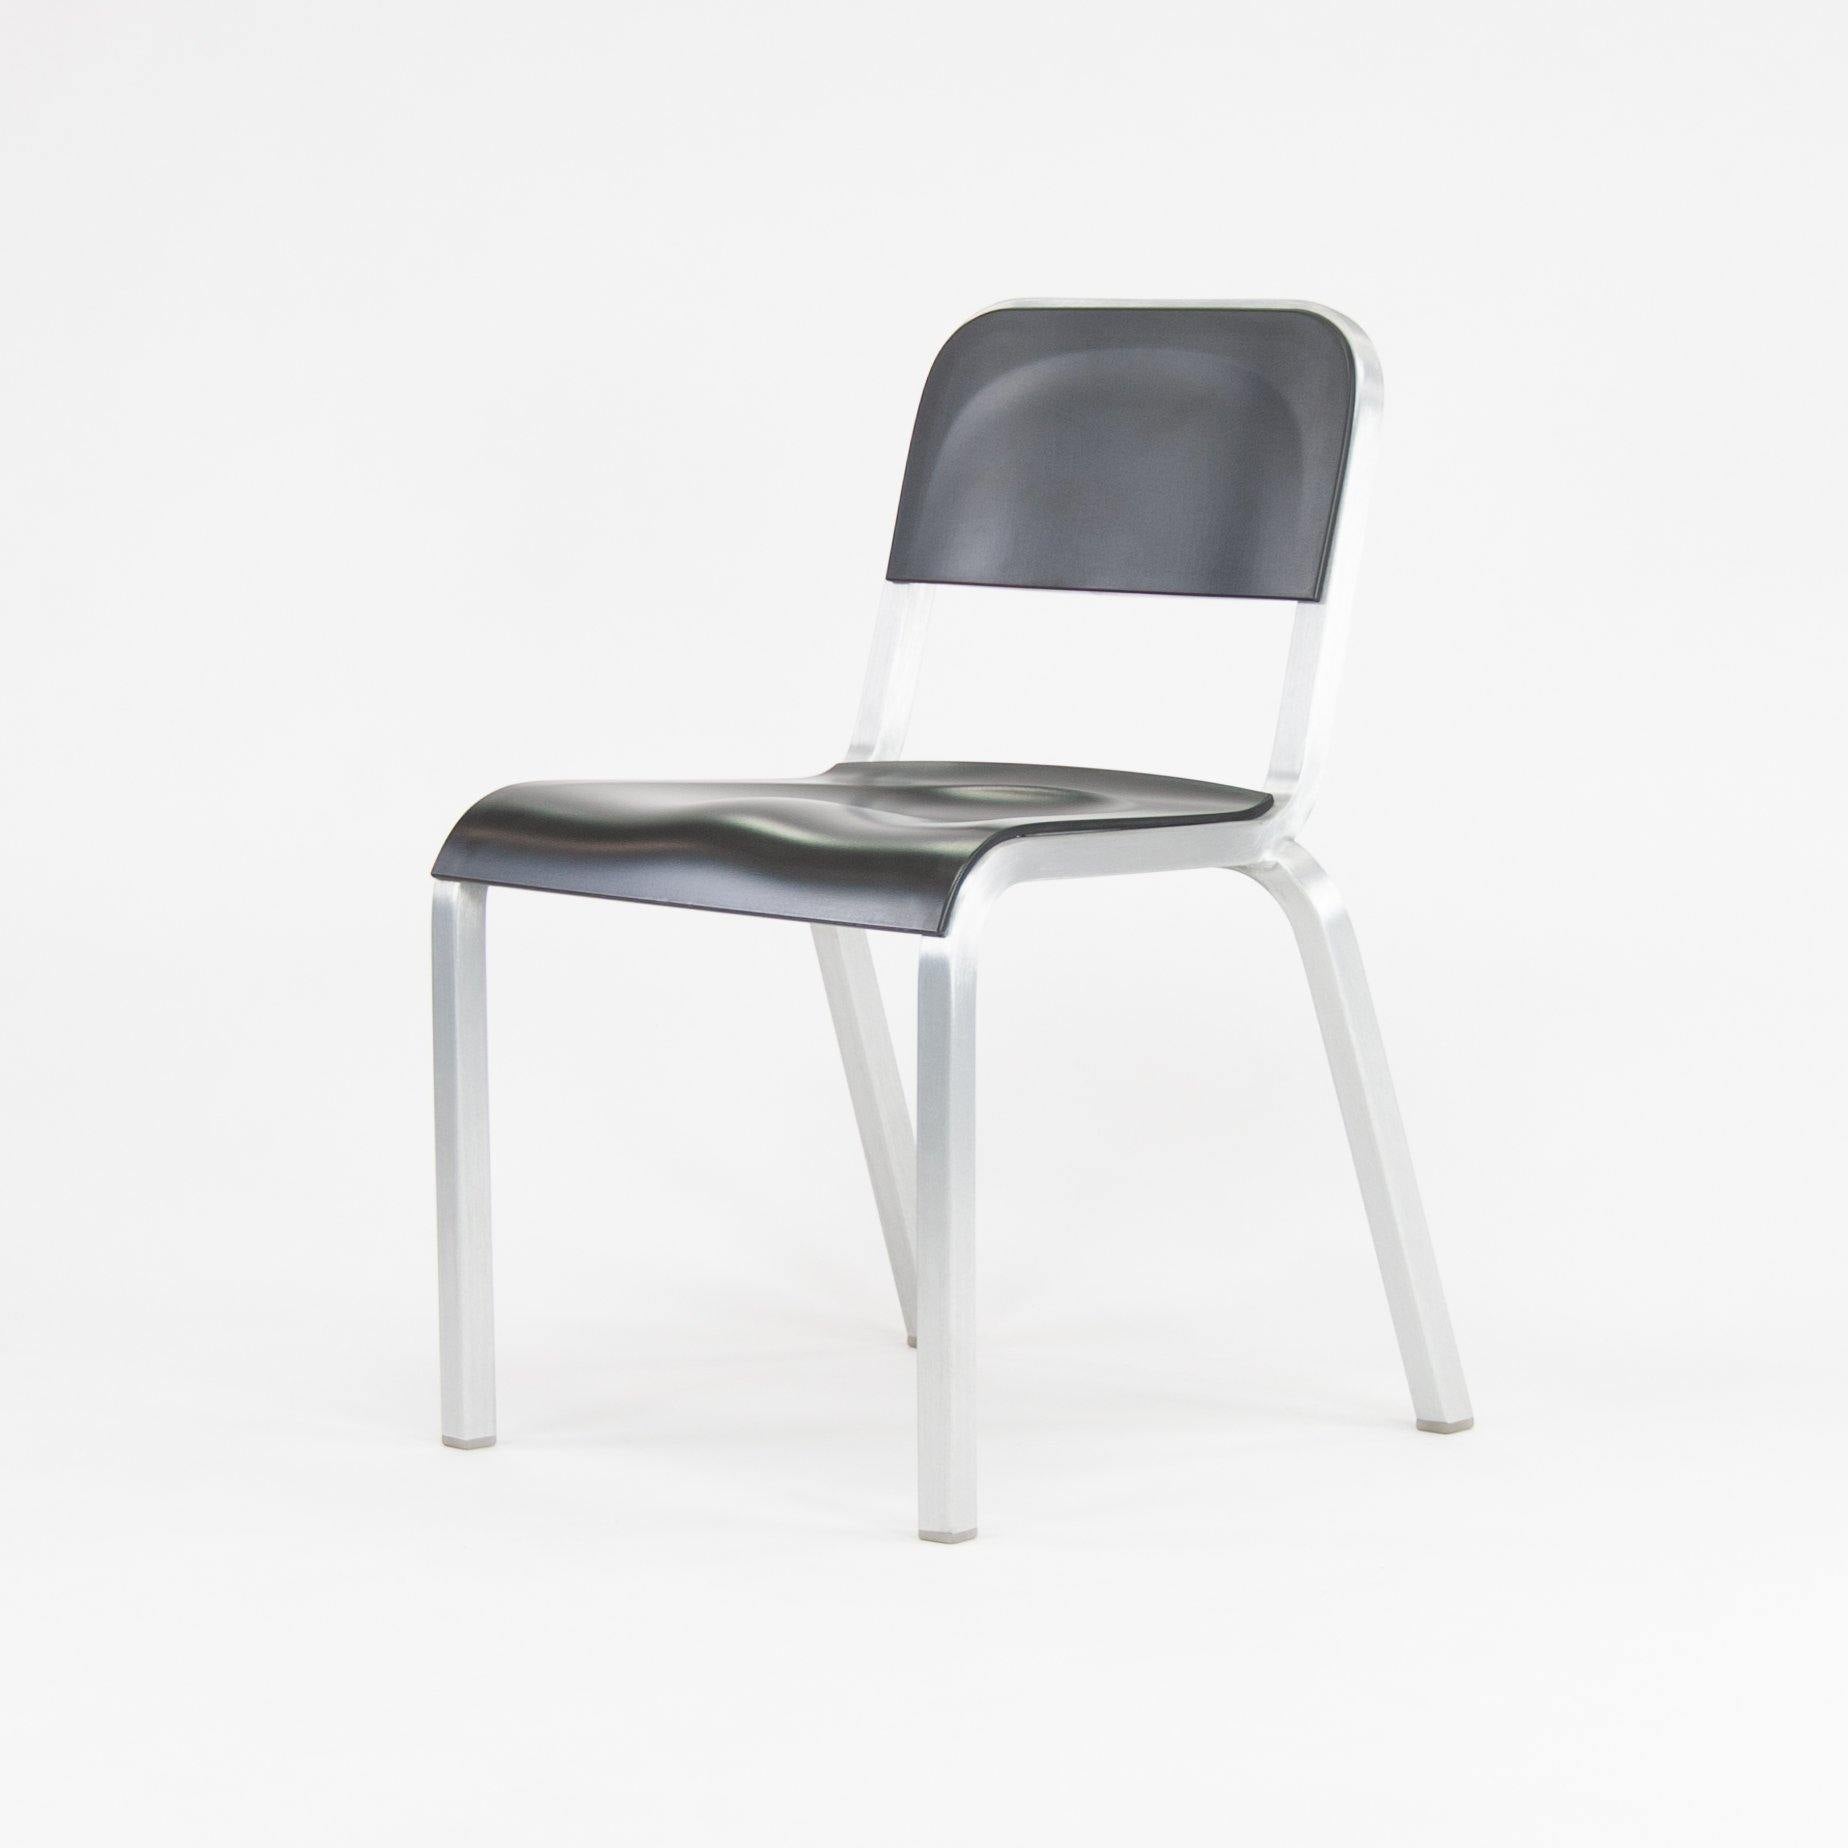 BMW Designworks for Emeco 1951 Stacking Dining Chair - Rarify Inc.